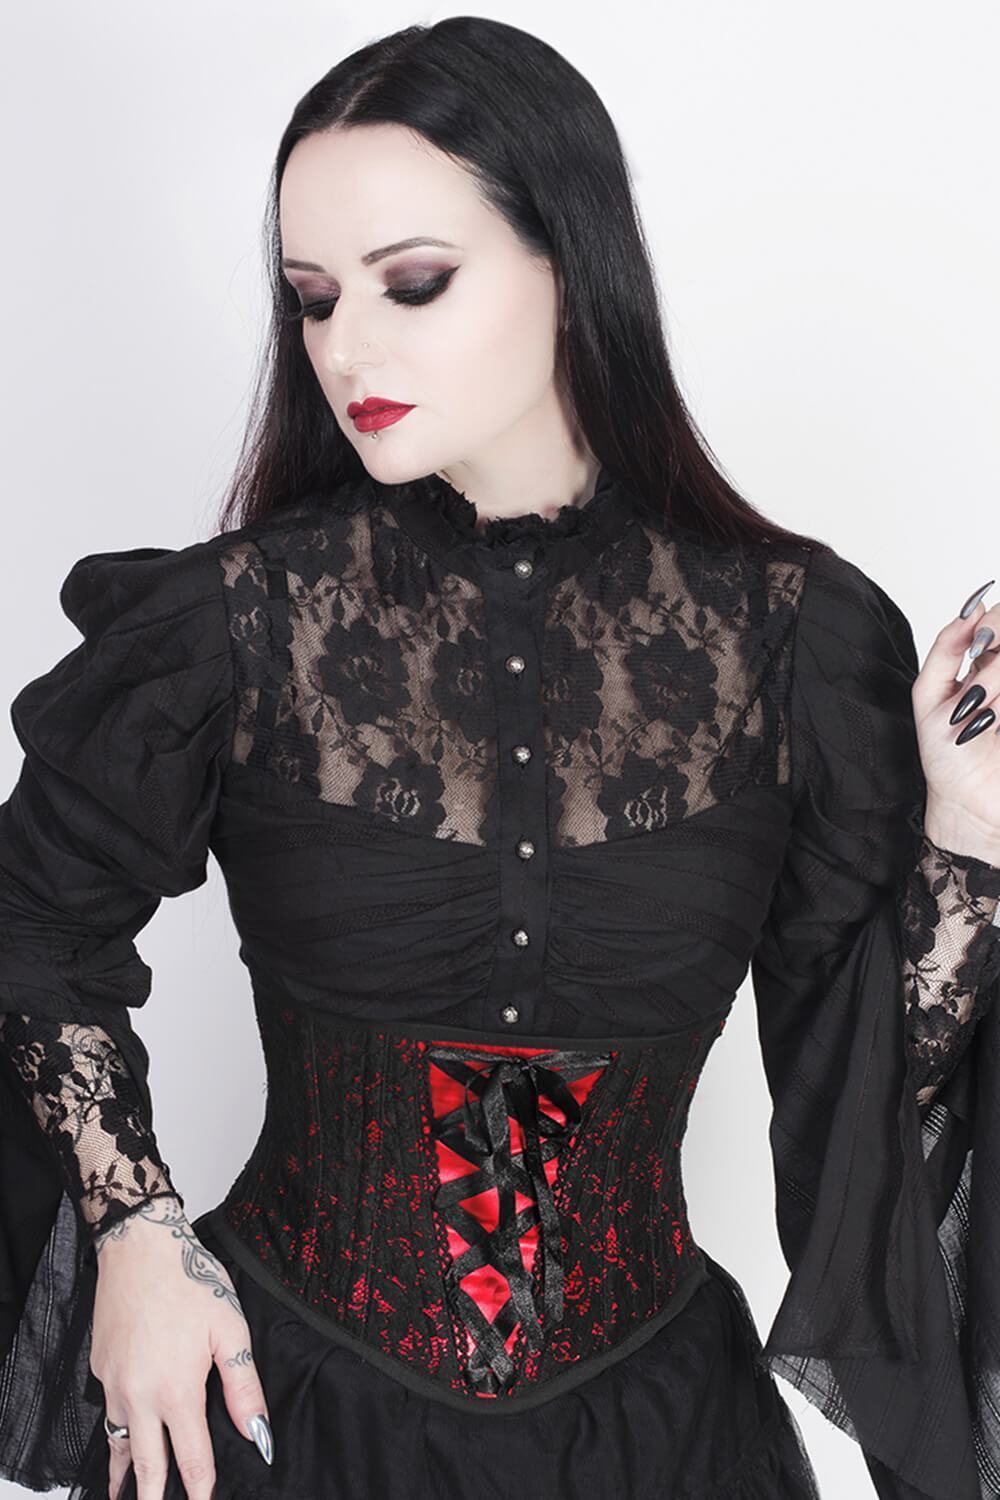 Shop Bespoke Corset and Underbust Corset from us at the lowest price